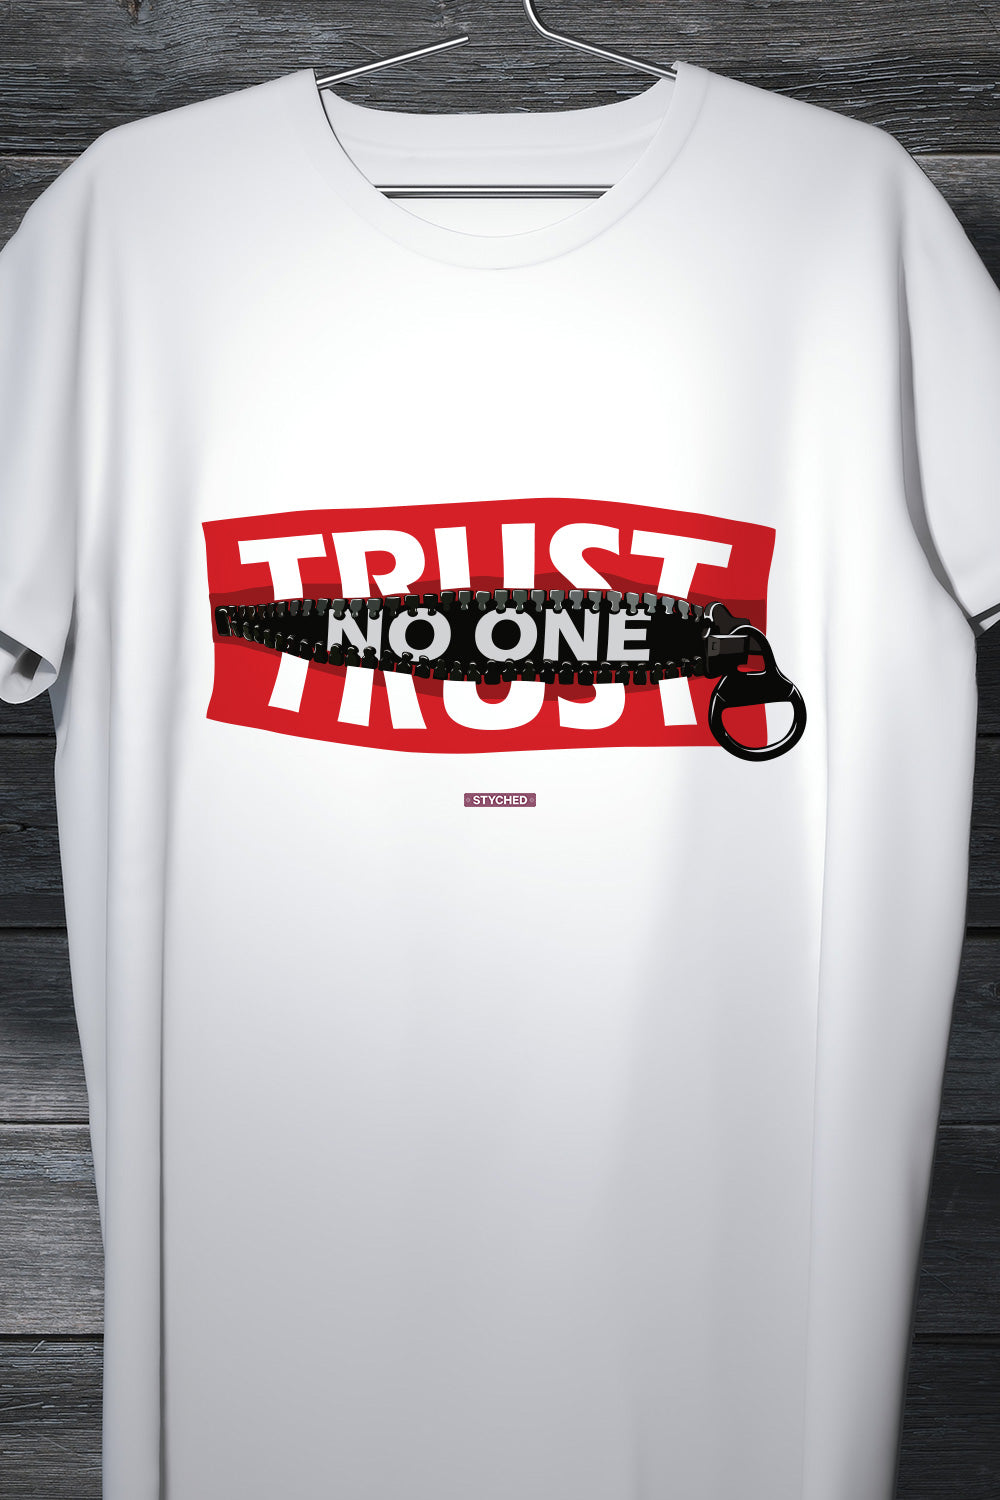 Paytm Exclusive - Trust No One - Graphic Printed White T Shirt